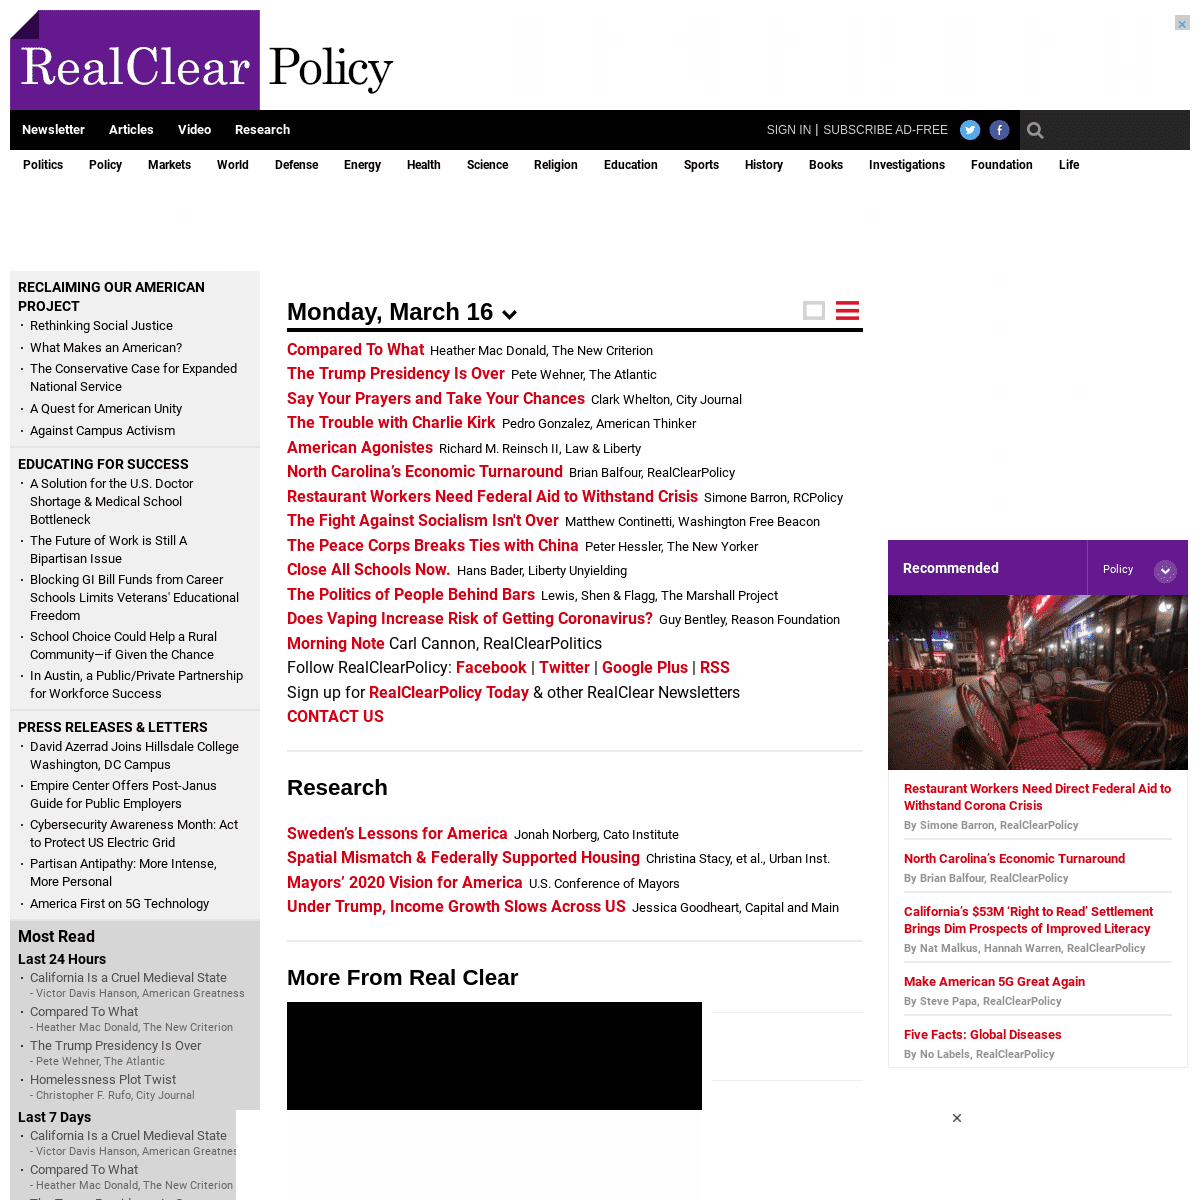 A complete backup of realclearpolicy.com